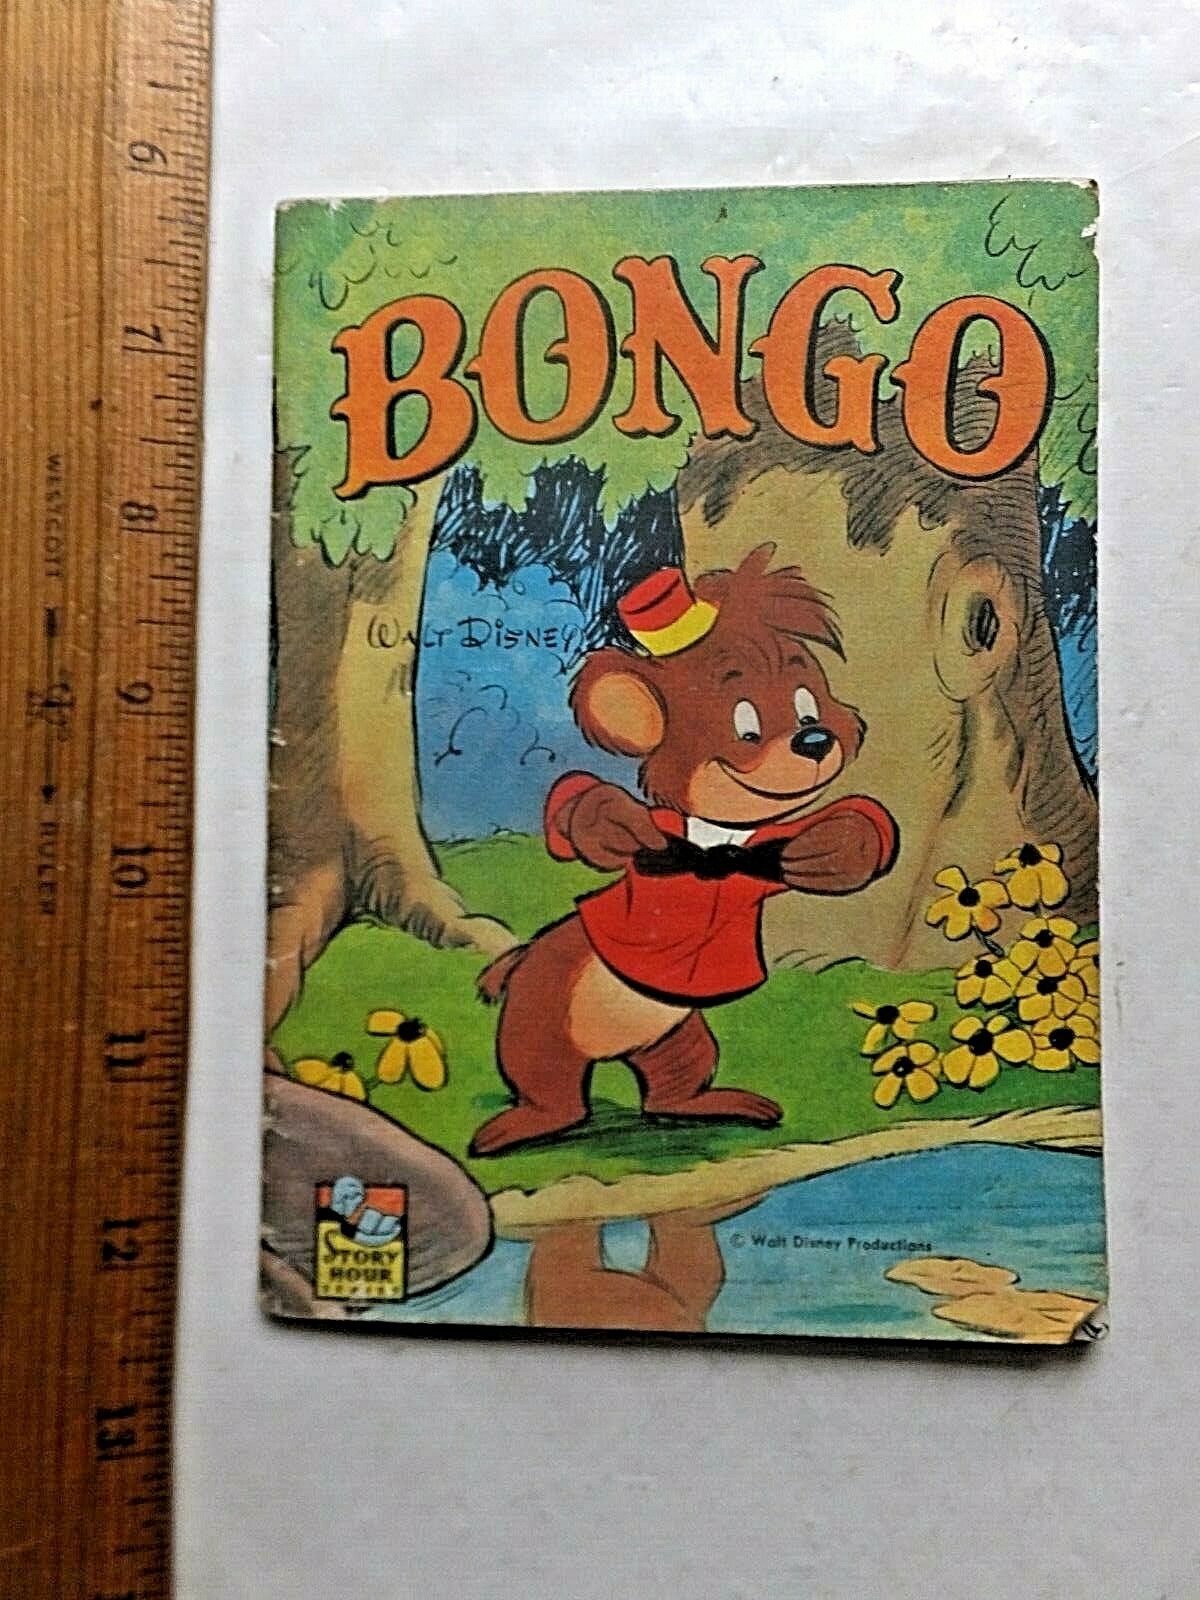 1958 Children's Book. Walt Disney's Bongo. 32 Pages. Softcover. Well Illustrated